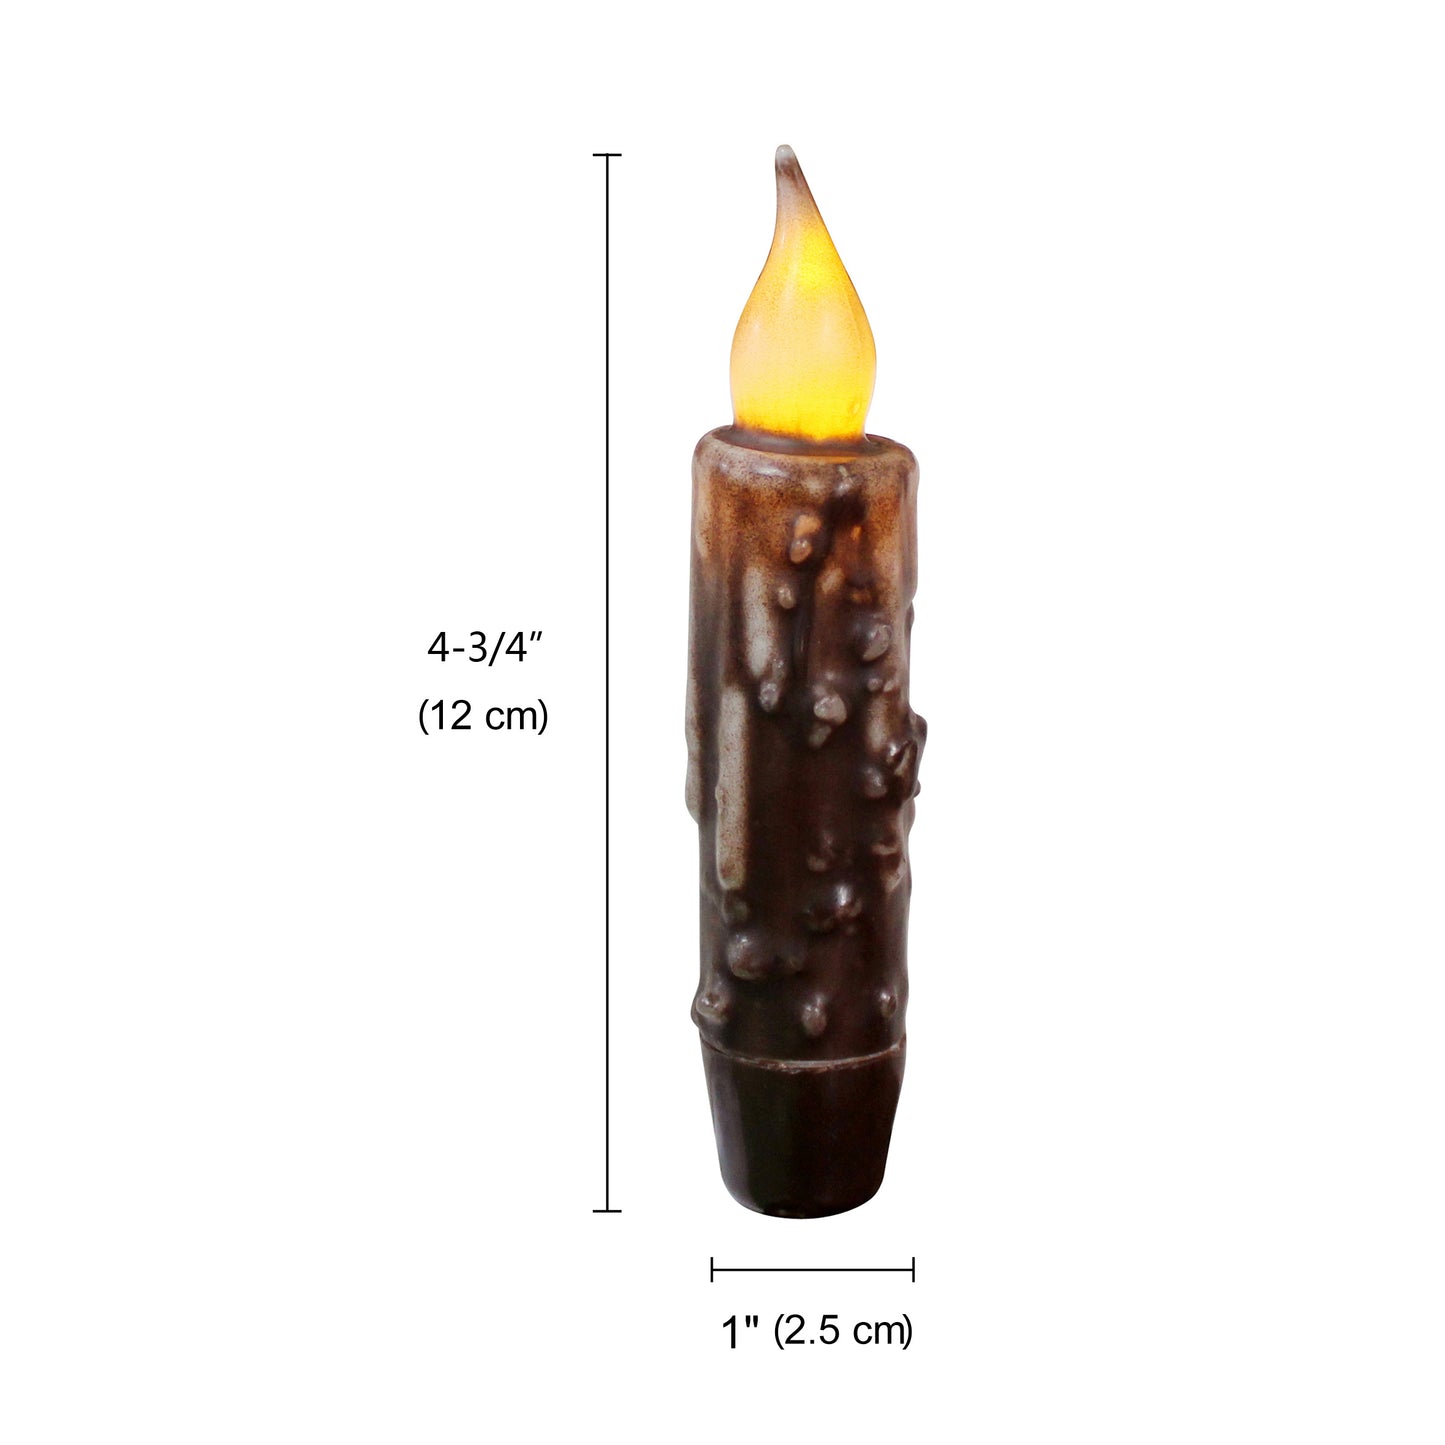 CVHOMEDECO. Real Wax Hand Dipped Battery Operated LED Timer Taper Candles Country Primitive Flameless Lights Décor, 4.75 Inch, Brown, 2 PCS in a Package